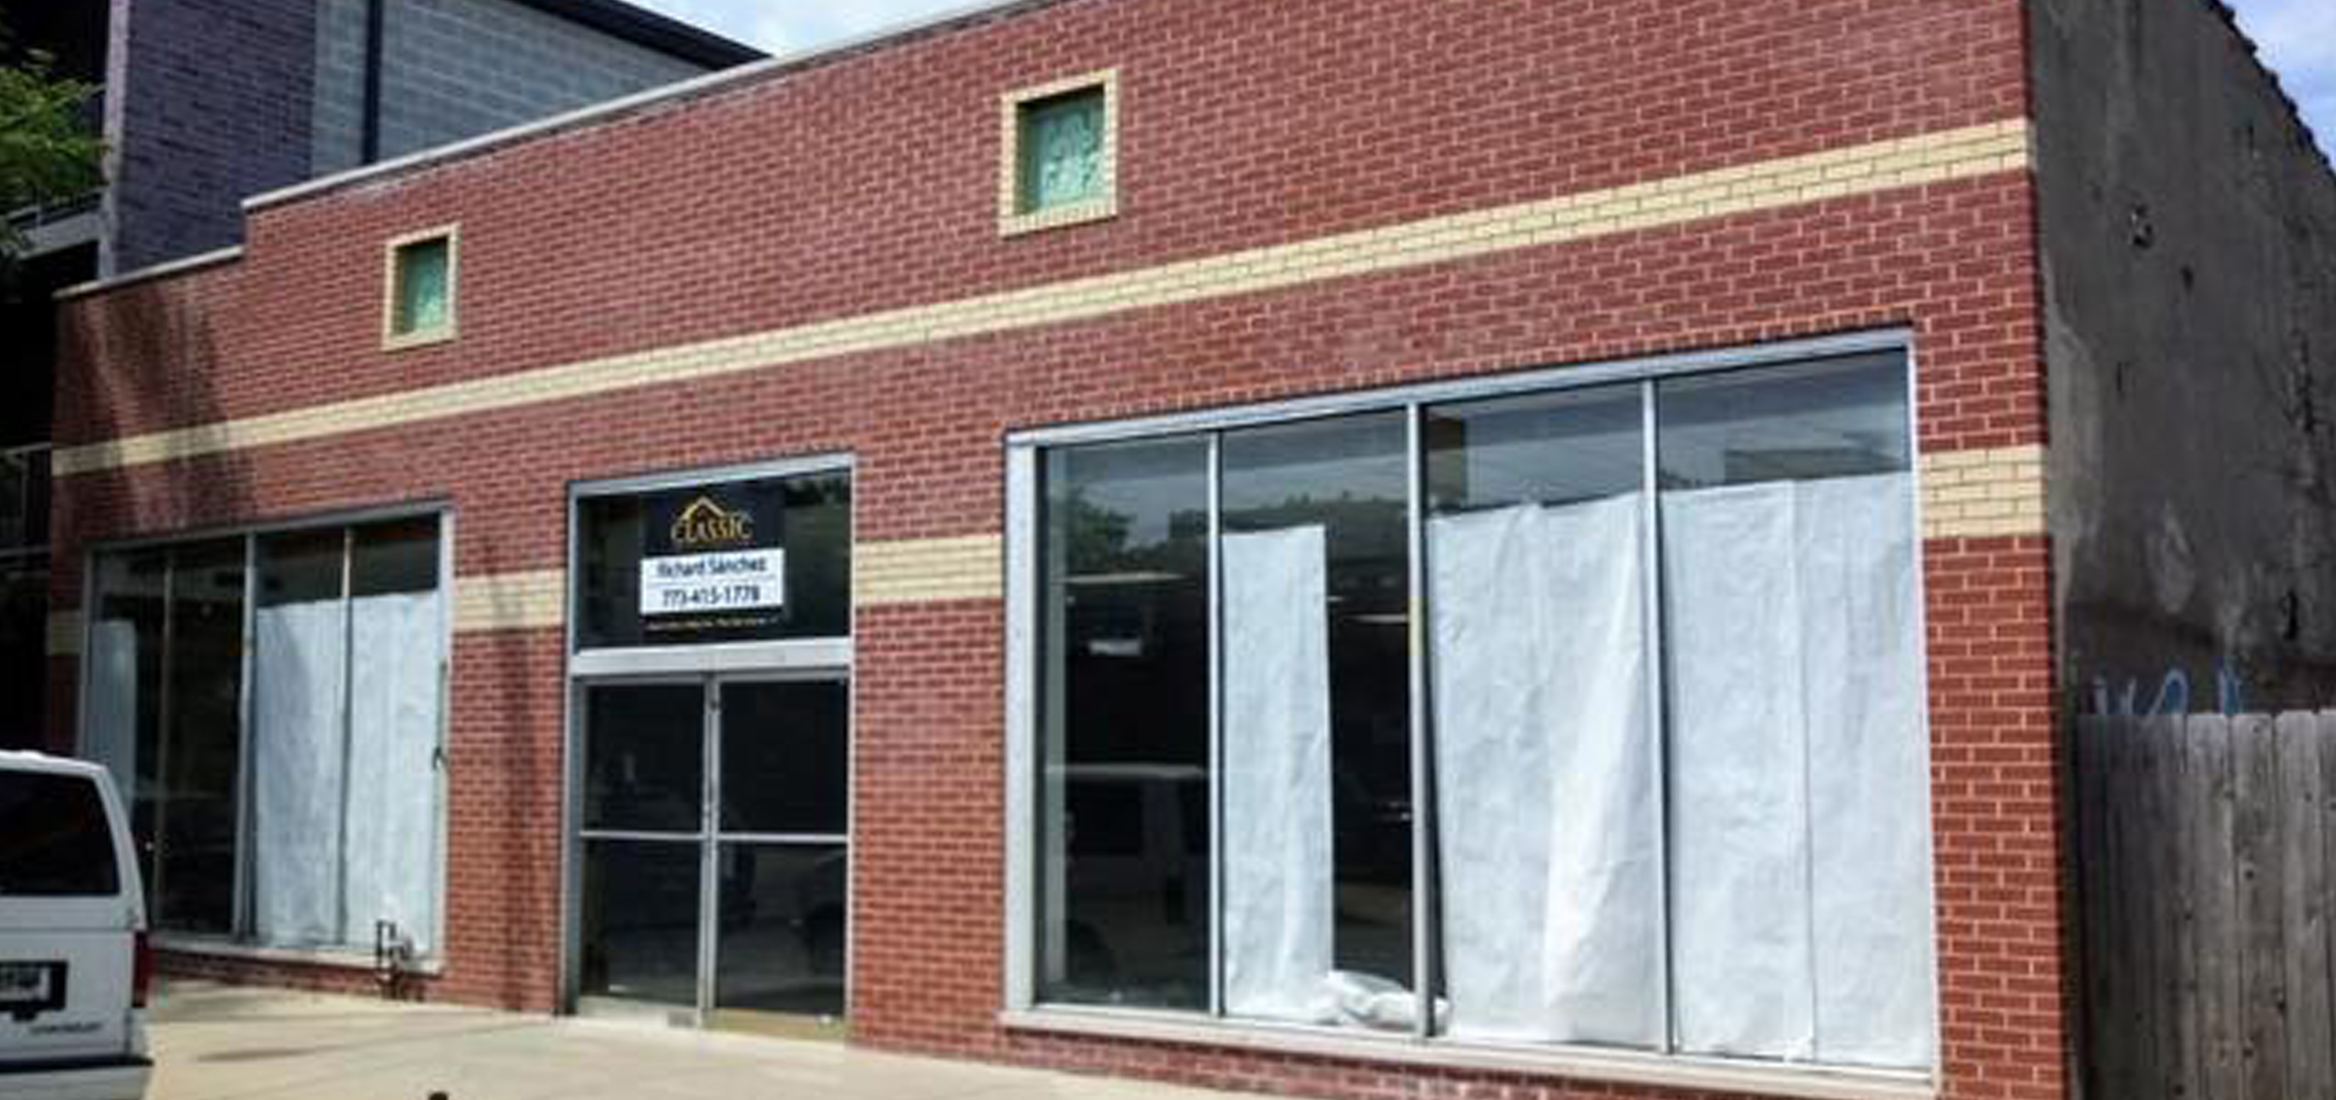 Recently rehabbed retail store